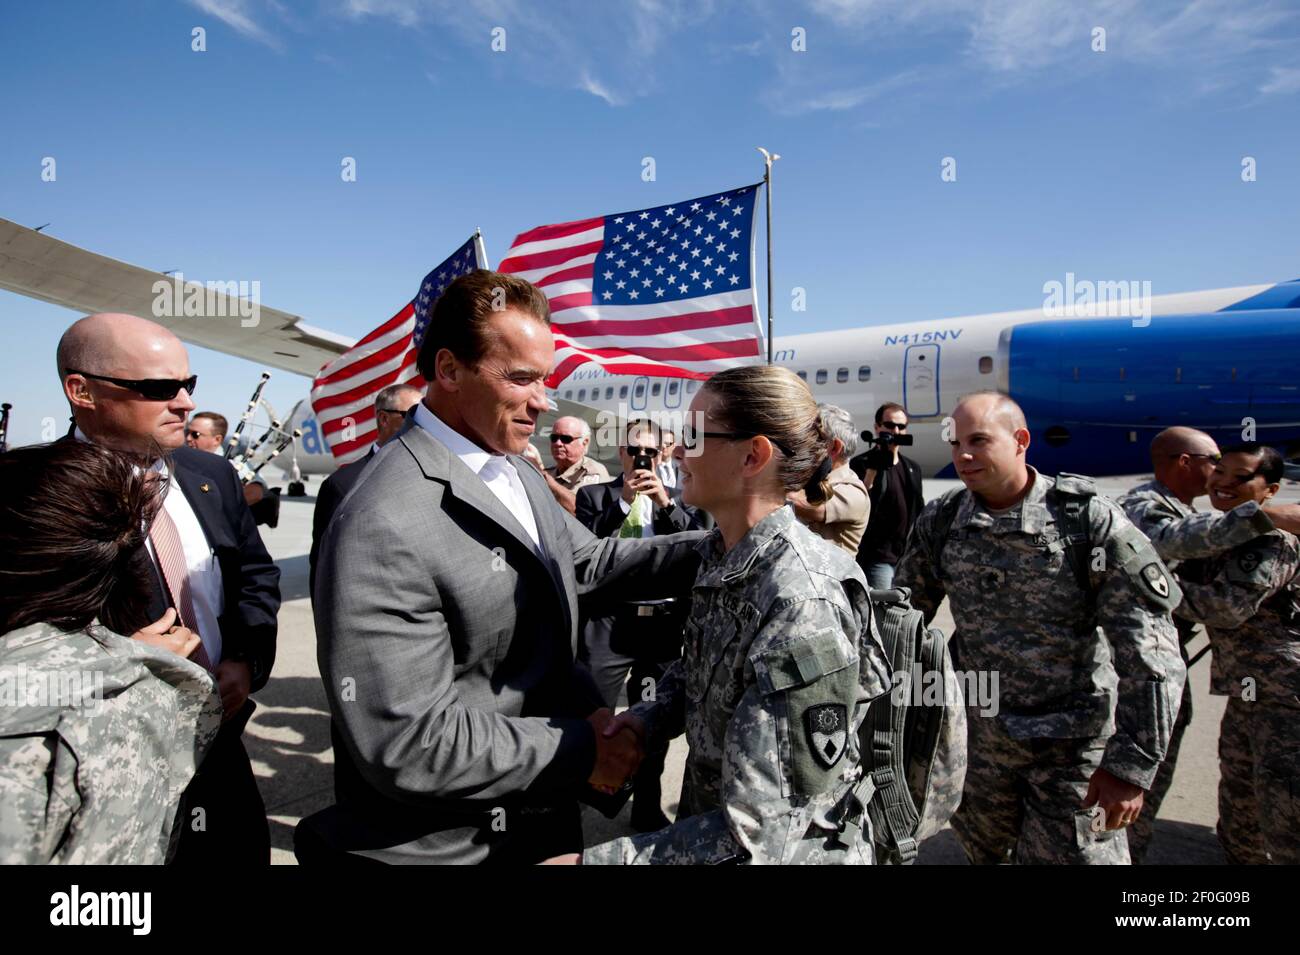 10 August 2010 - Fairfield, California - Governor Arnold Schwarzenegger welcomed home nearly 100 California National Guard soldiers from the GuardÃ•s 49th Military Police Brigade as they returned from their one-year deployment in support of Operation Iraqi Freedom. In November 2009, the Governor visited with U.S. military troops, including these guardsmen, at Camp Victory in Baghdad, Iraq to thank them for their service to our nation. The following photos were taken at Travis Air Force Base in Fairfield, California. Photo Credit: Justin Short/Office of Gov. Schwarzenegger/Sipa Press/1008111932 Stock Photo